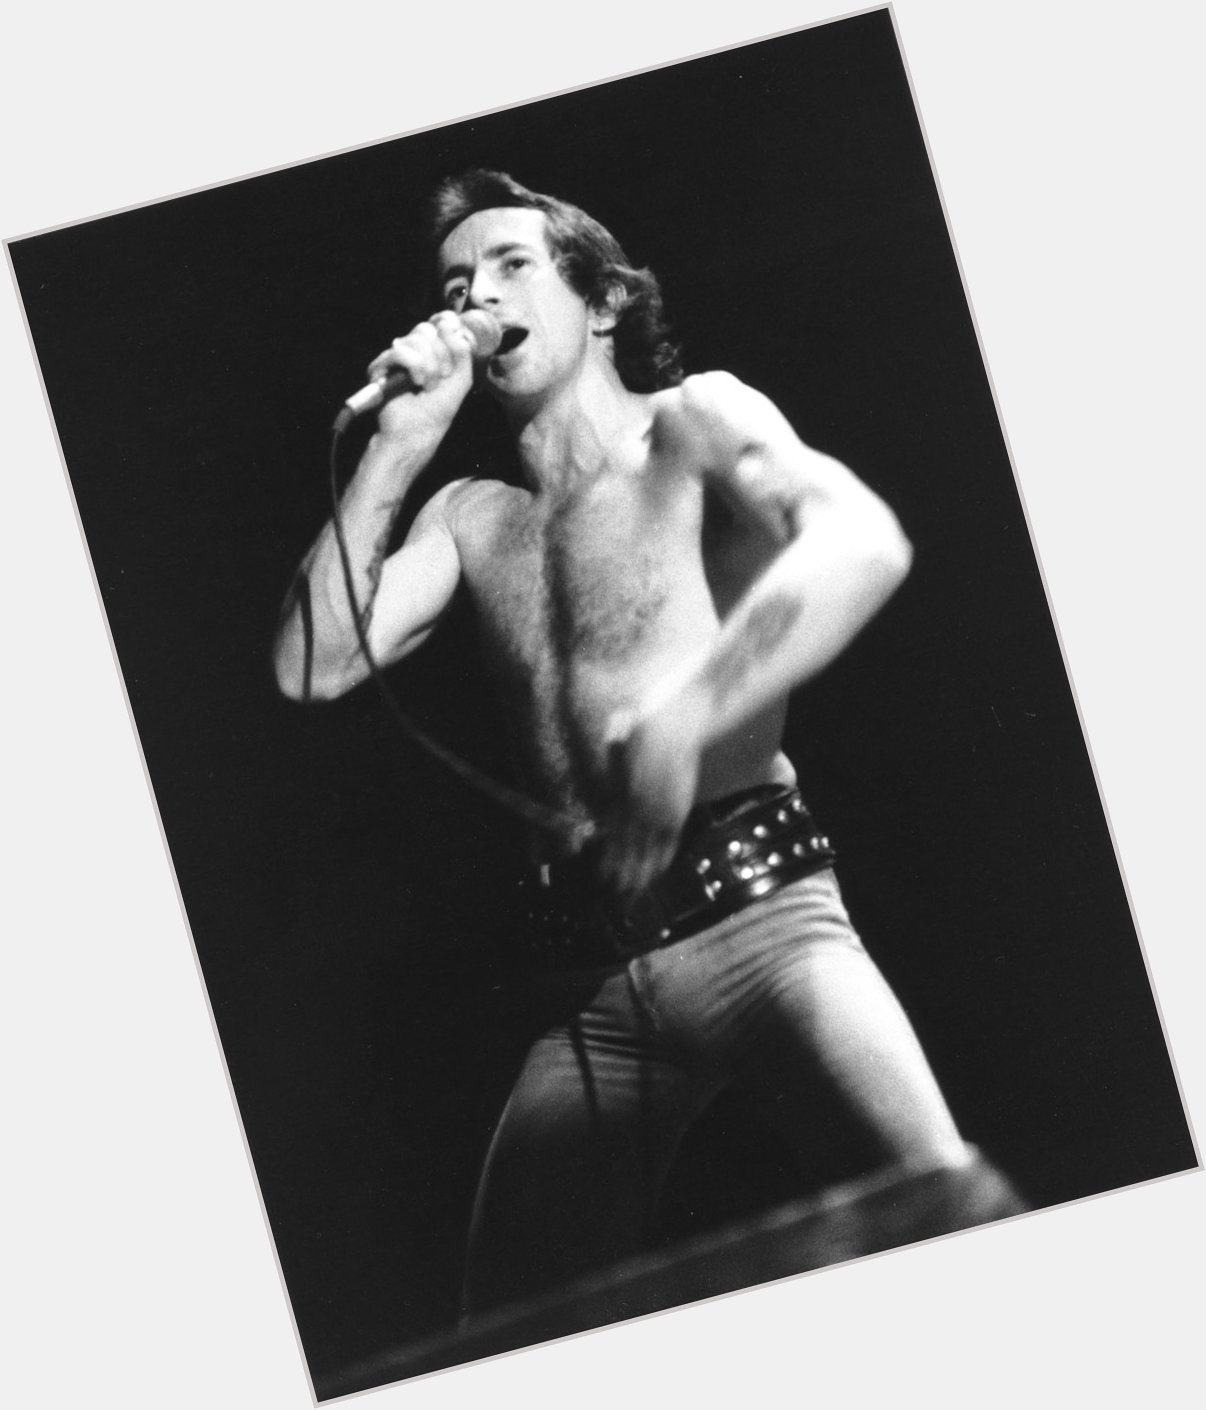 Happy birthday to Bon Scott of one of the greatest vocalists in rock history! 